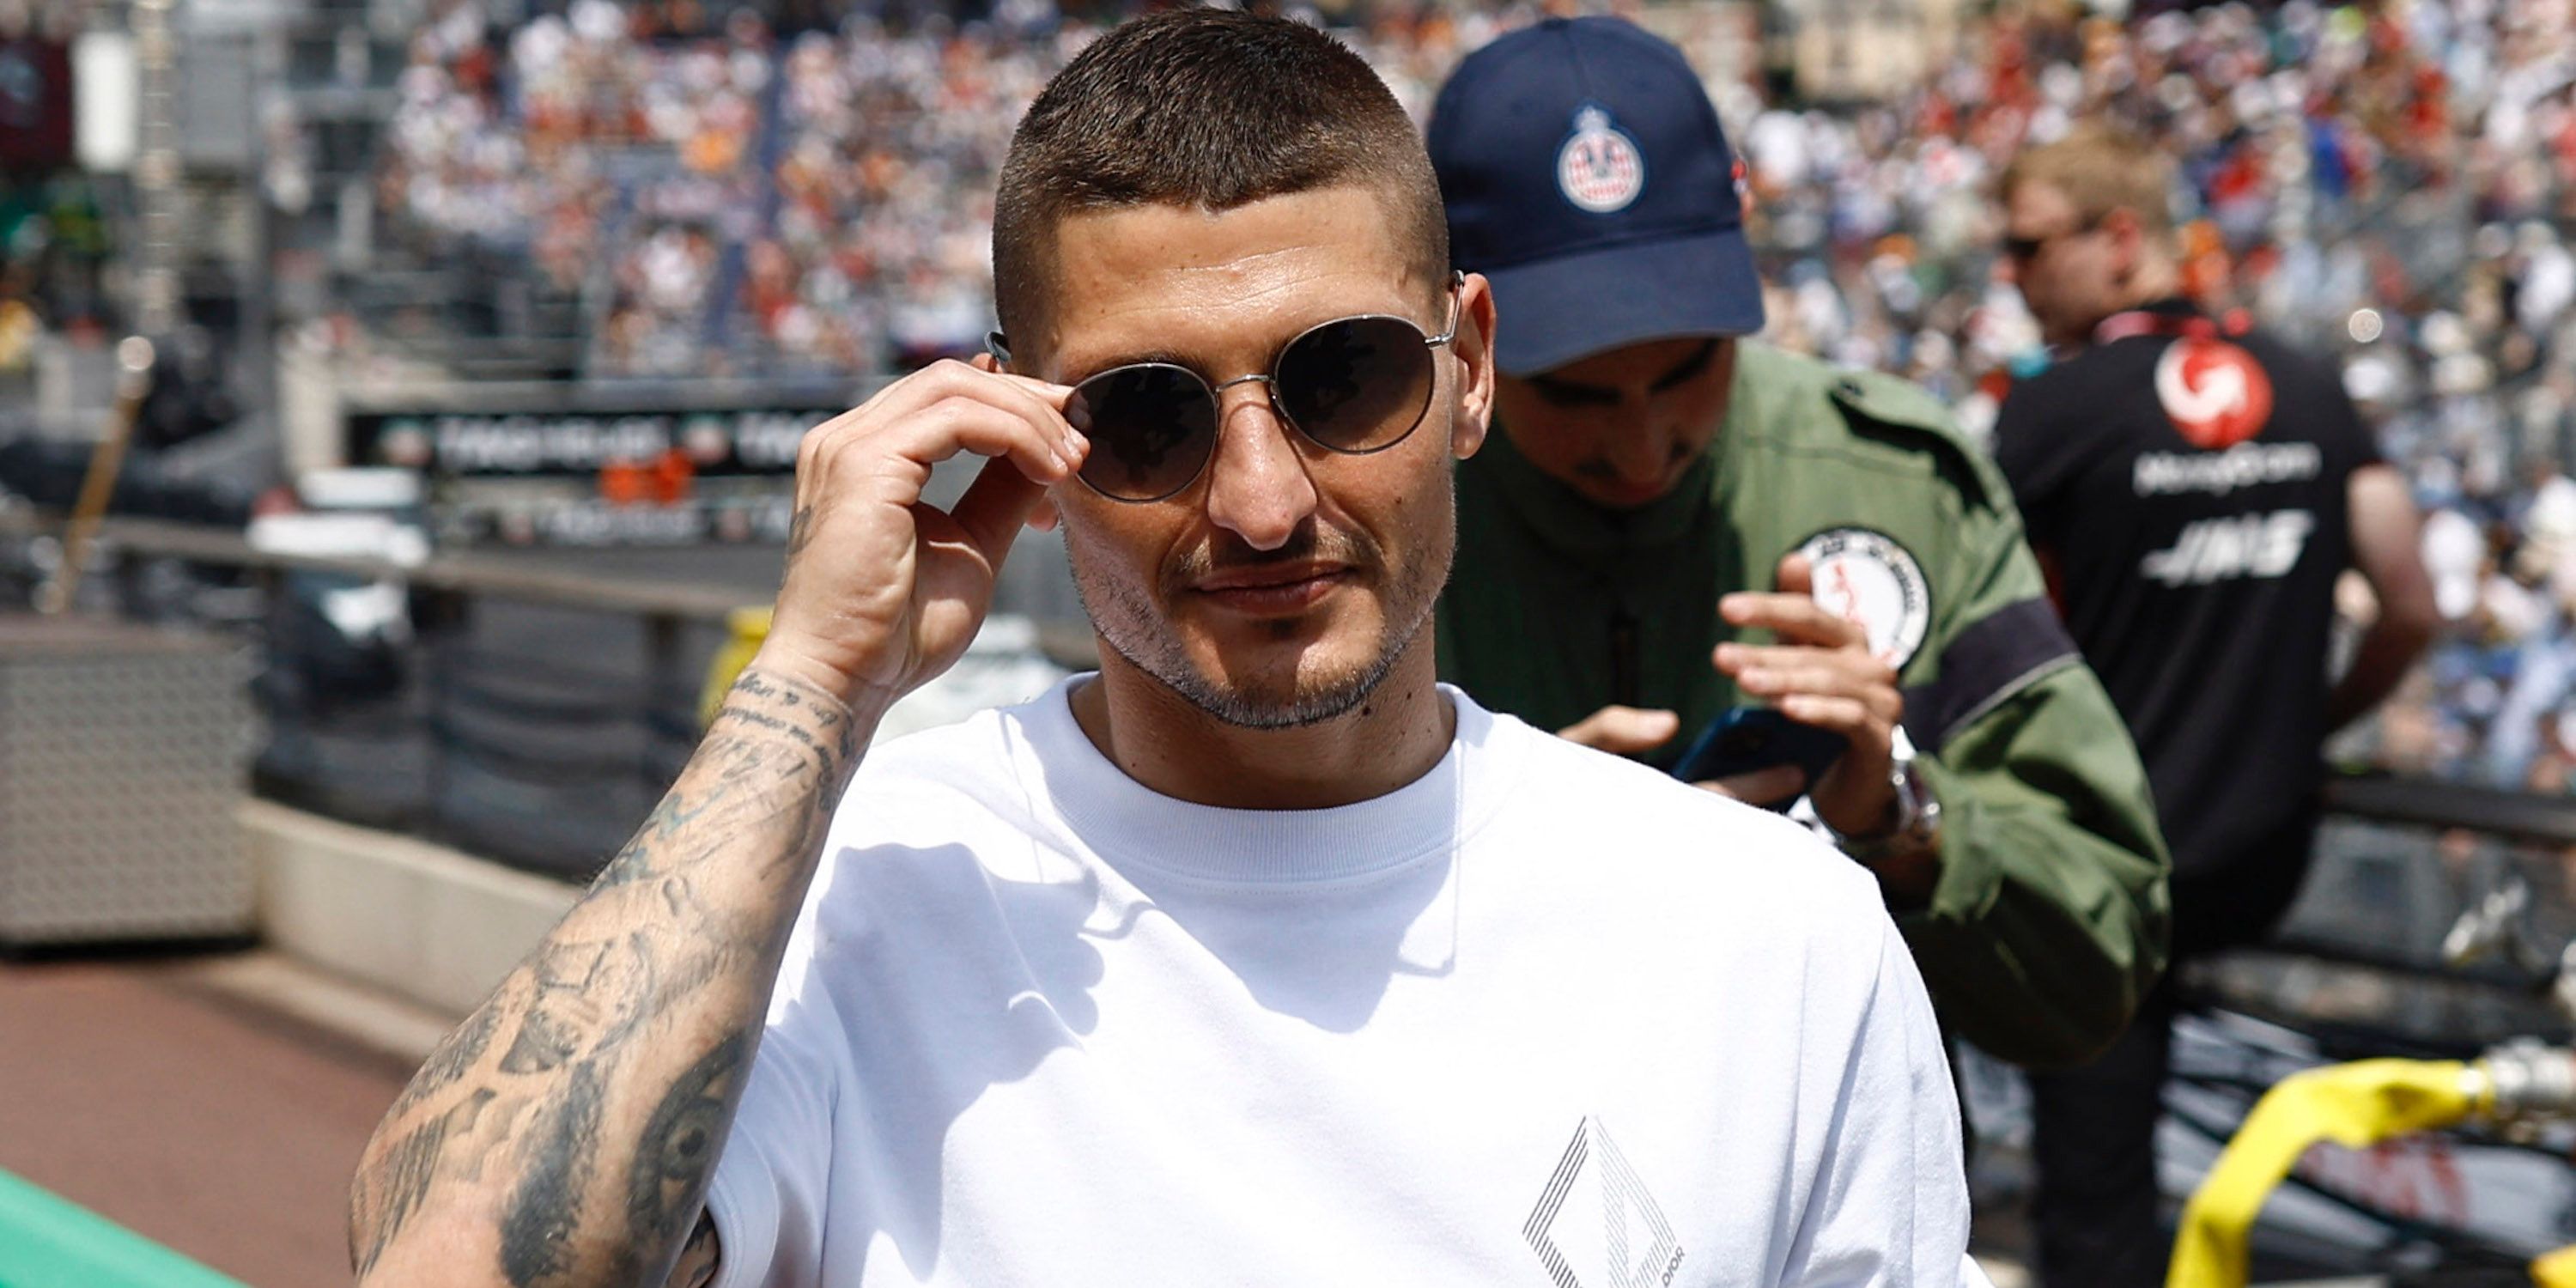 Paris St Germain's Marco Verratti is pictured ahead of the race